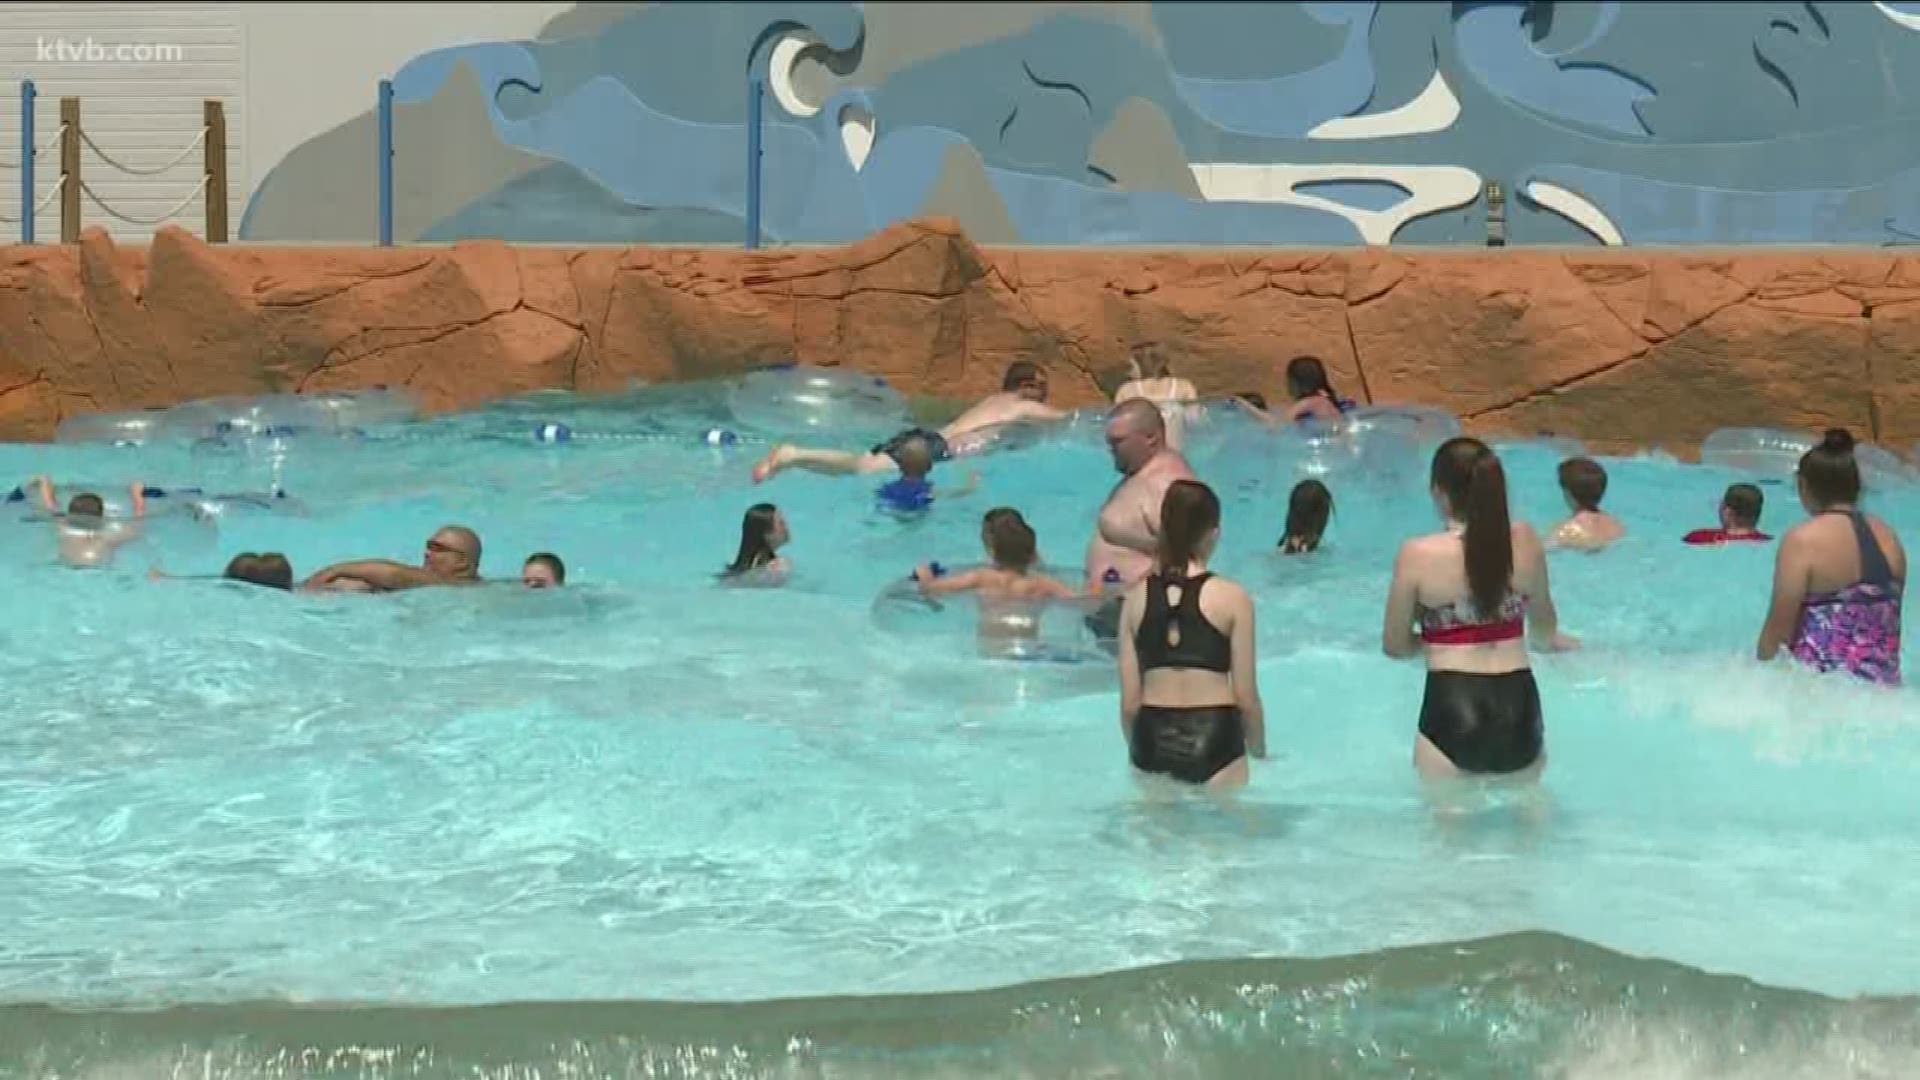 Roaring Springs opens for their 20th season on Saturday, with new